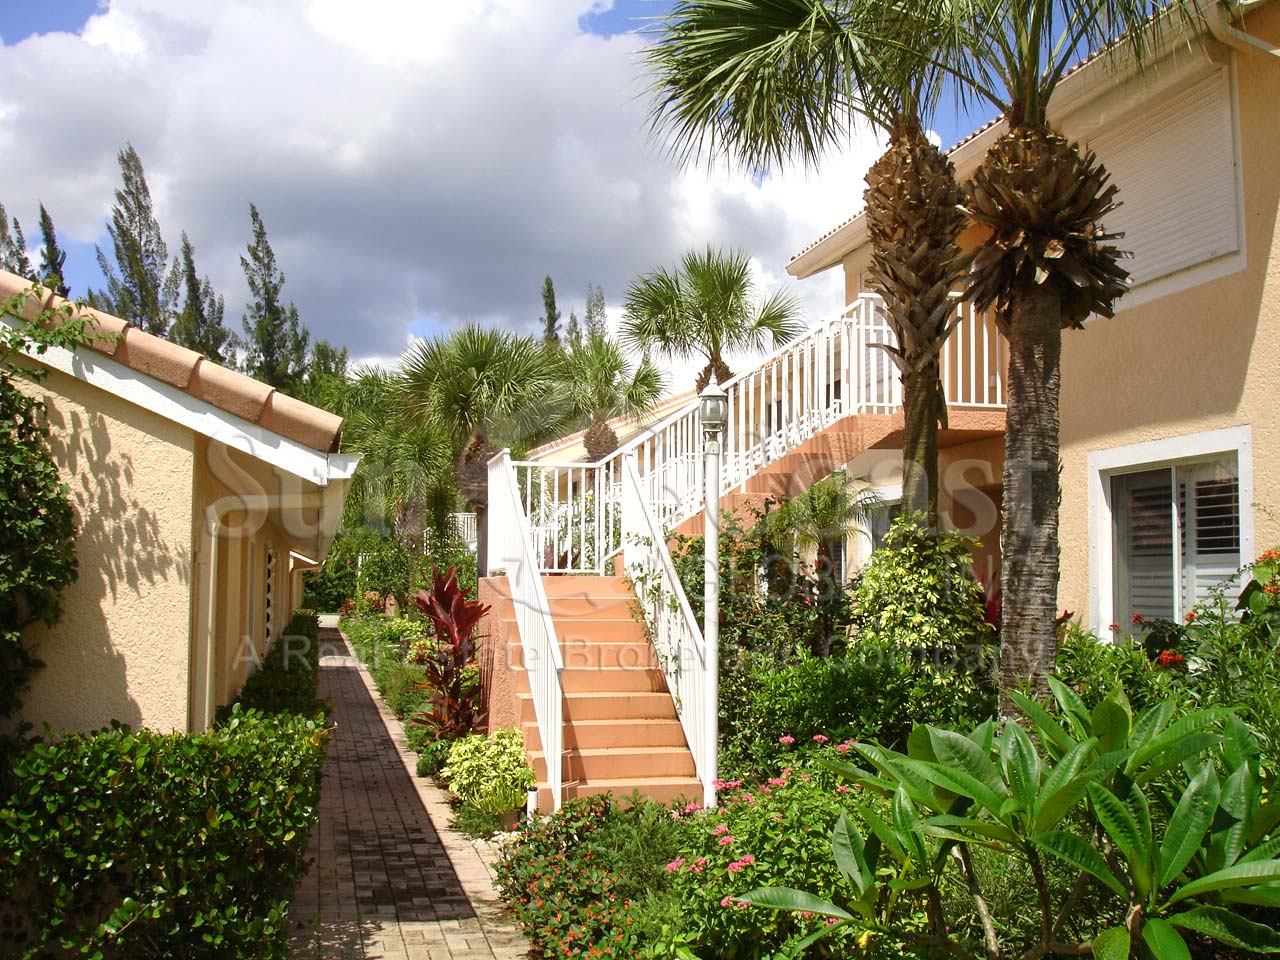 Amelia Lake Pathway from the Condominiums to the Detached Garages